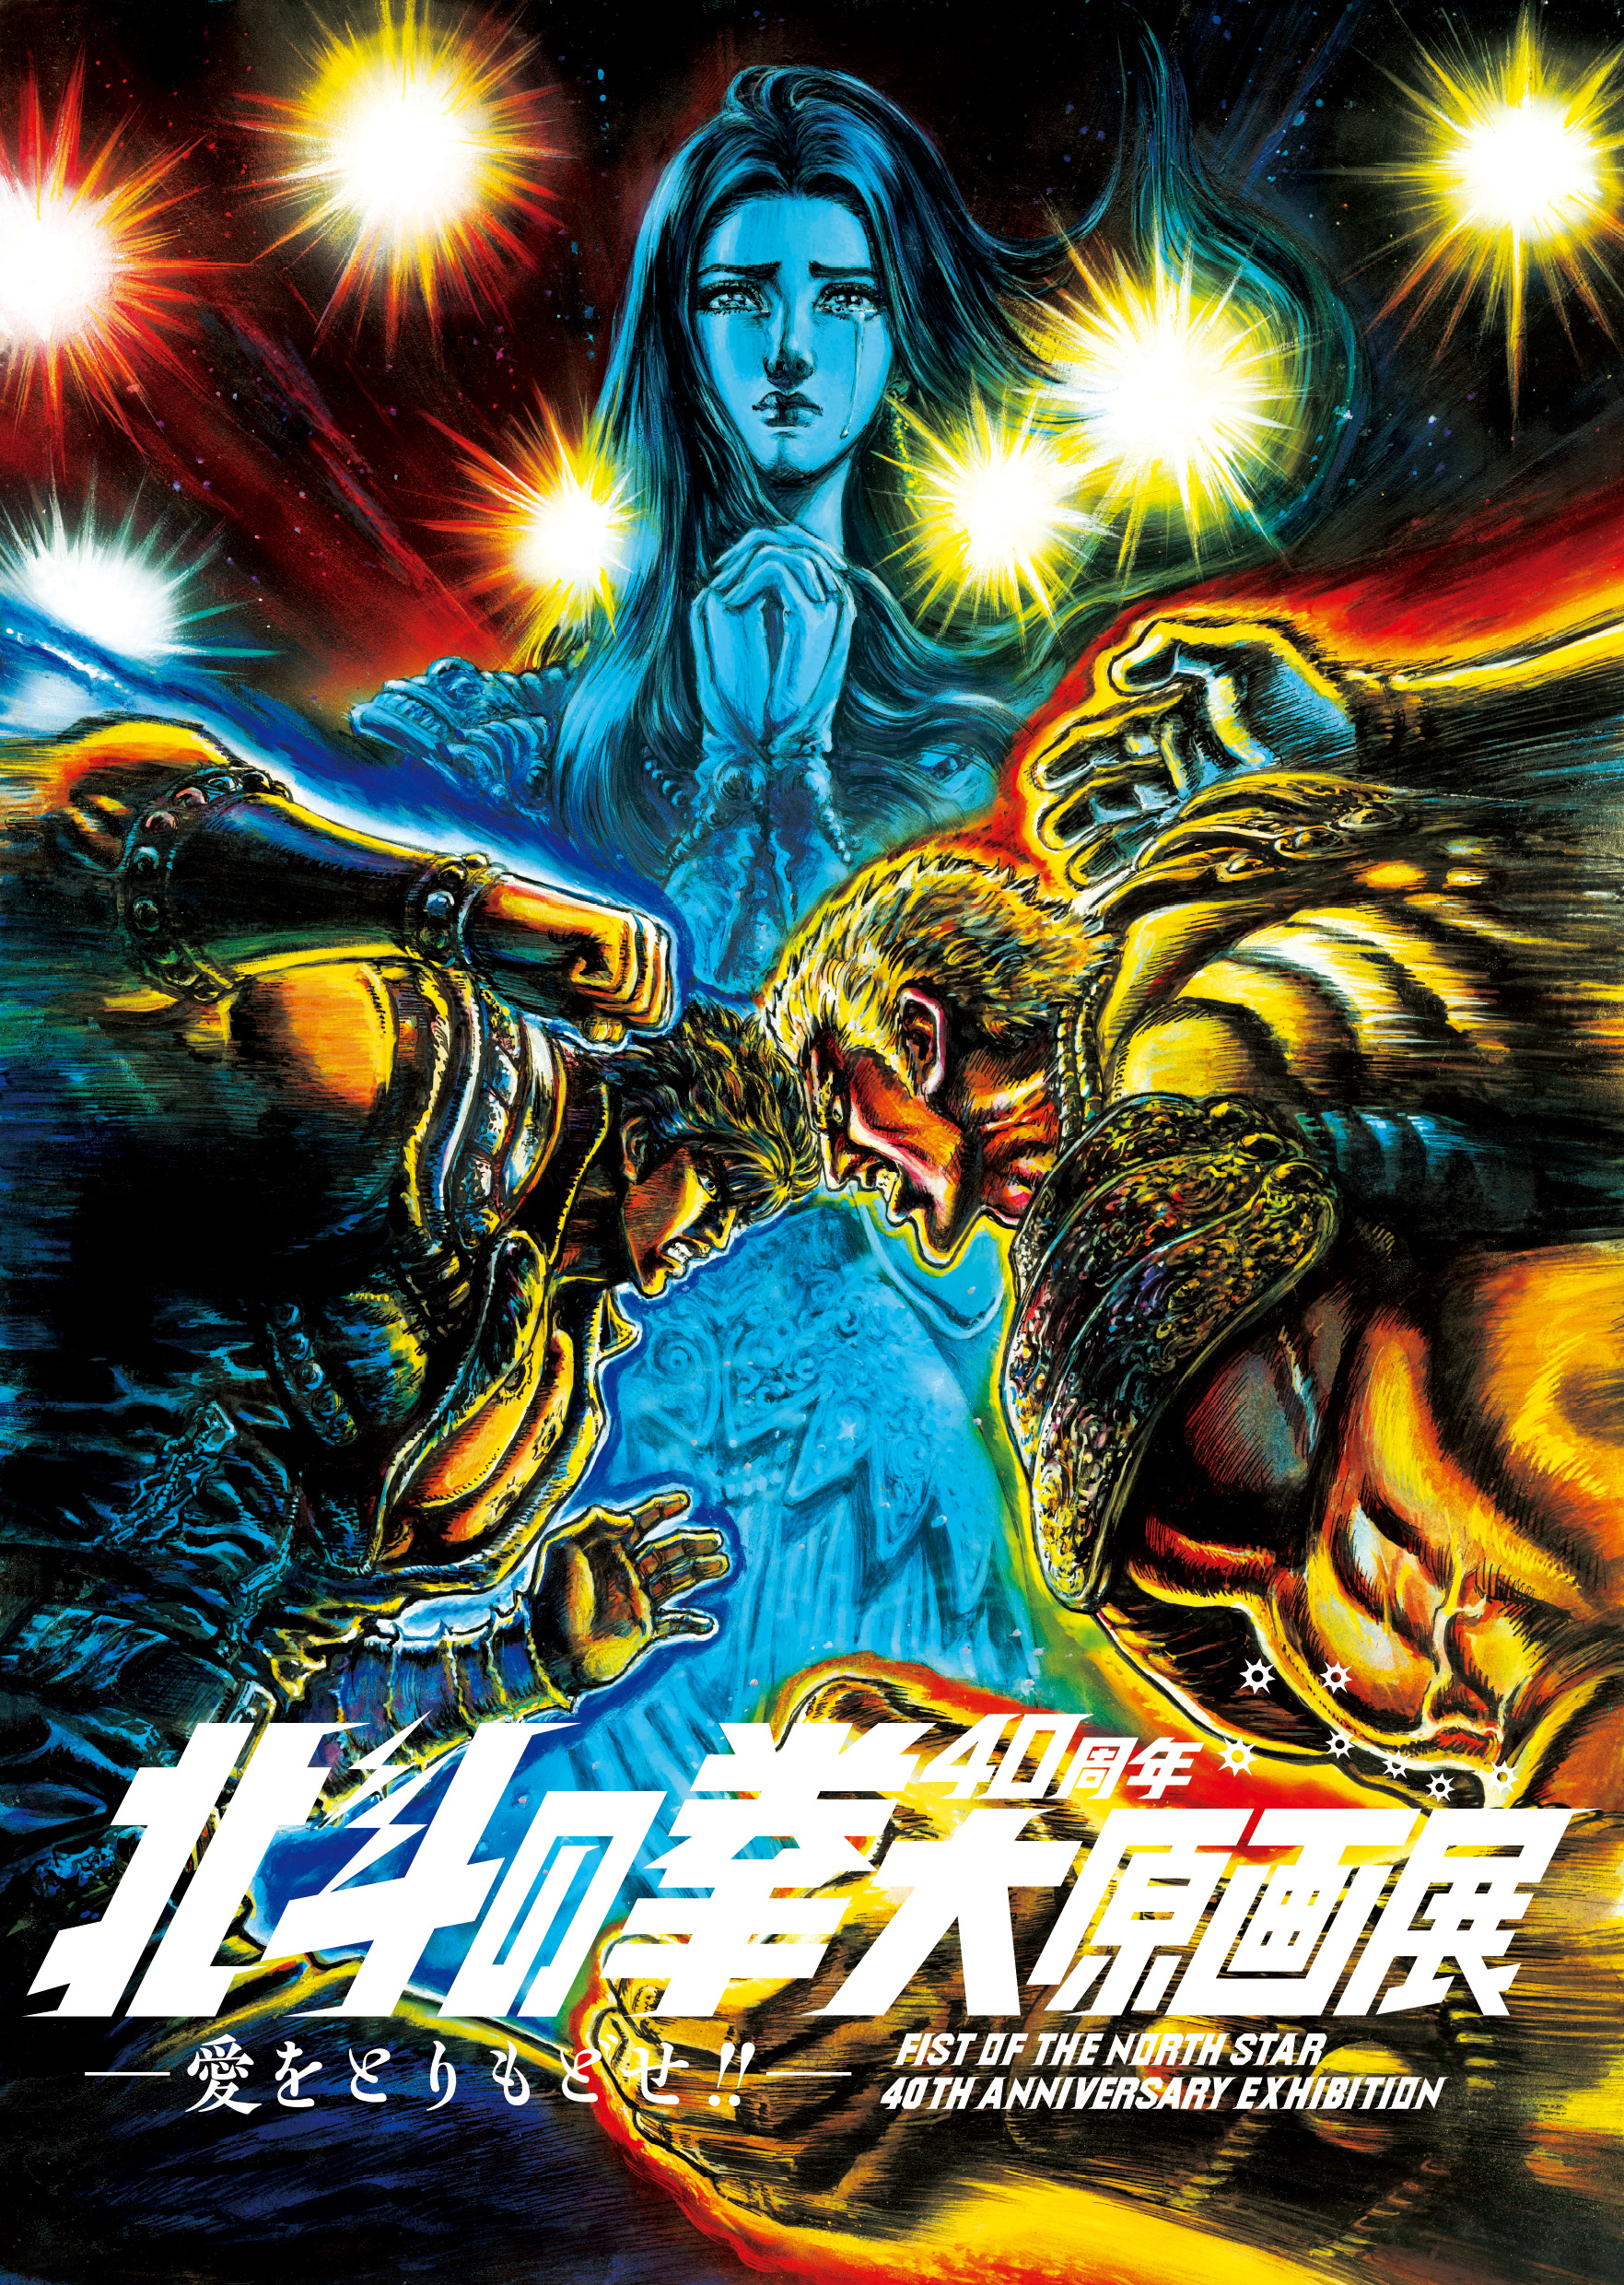 Fist of the North Star: 40th Anniversary Exhibition